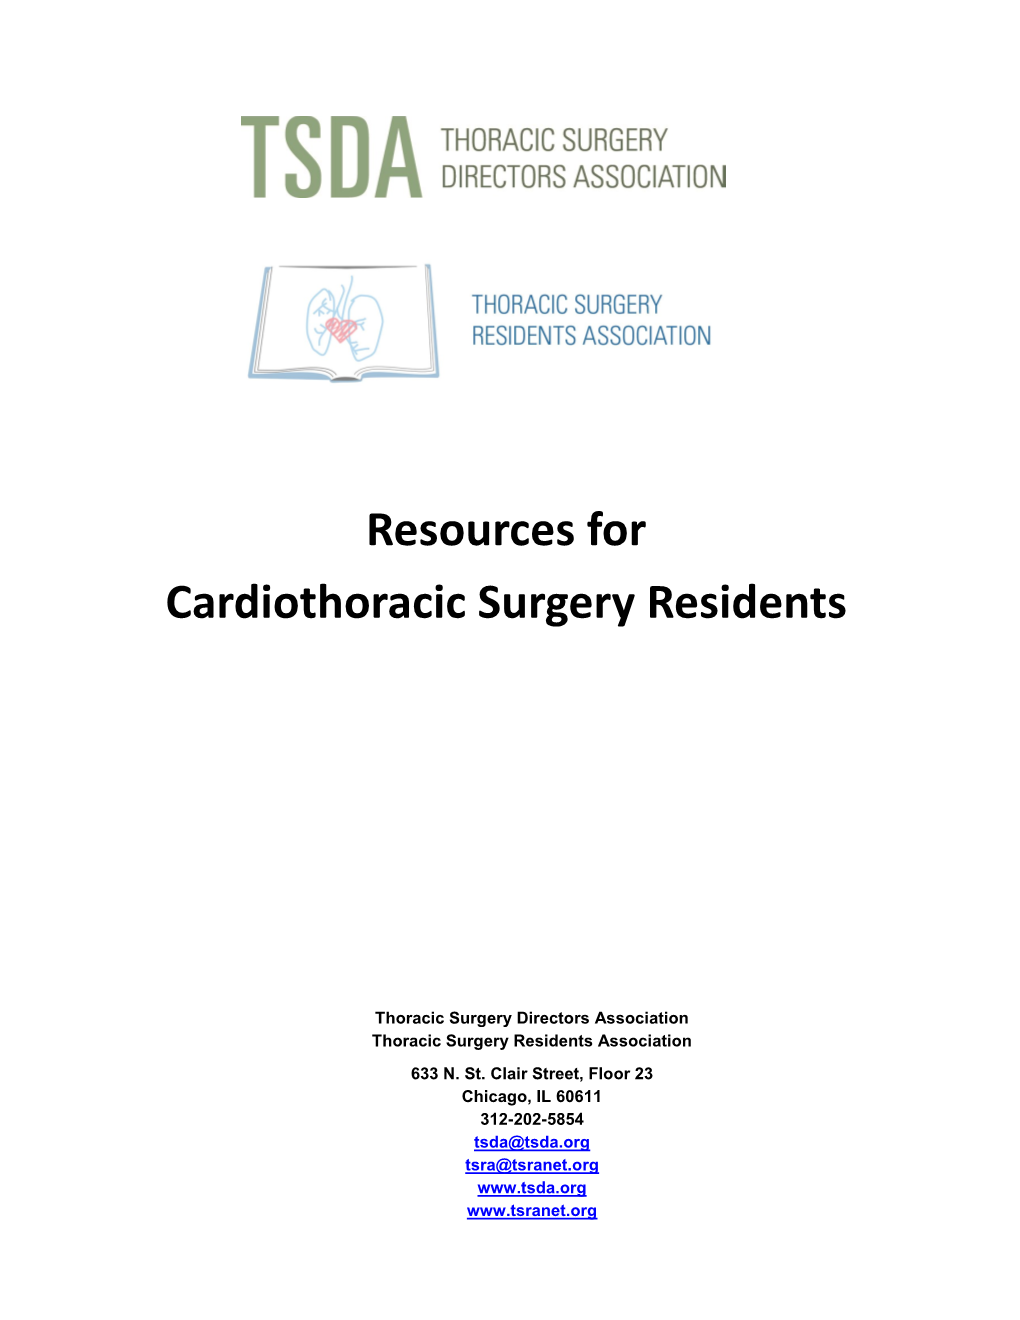 Resources for Cardiothoracic Surgery Residents